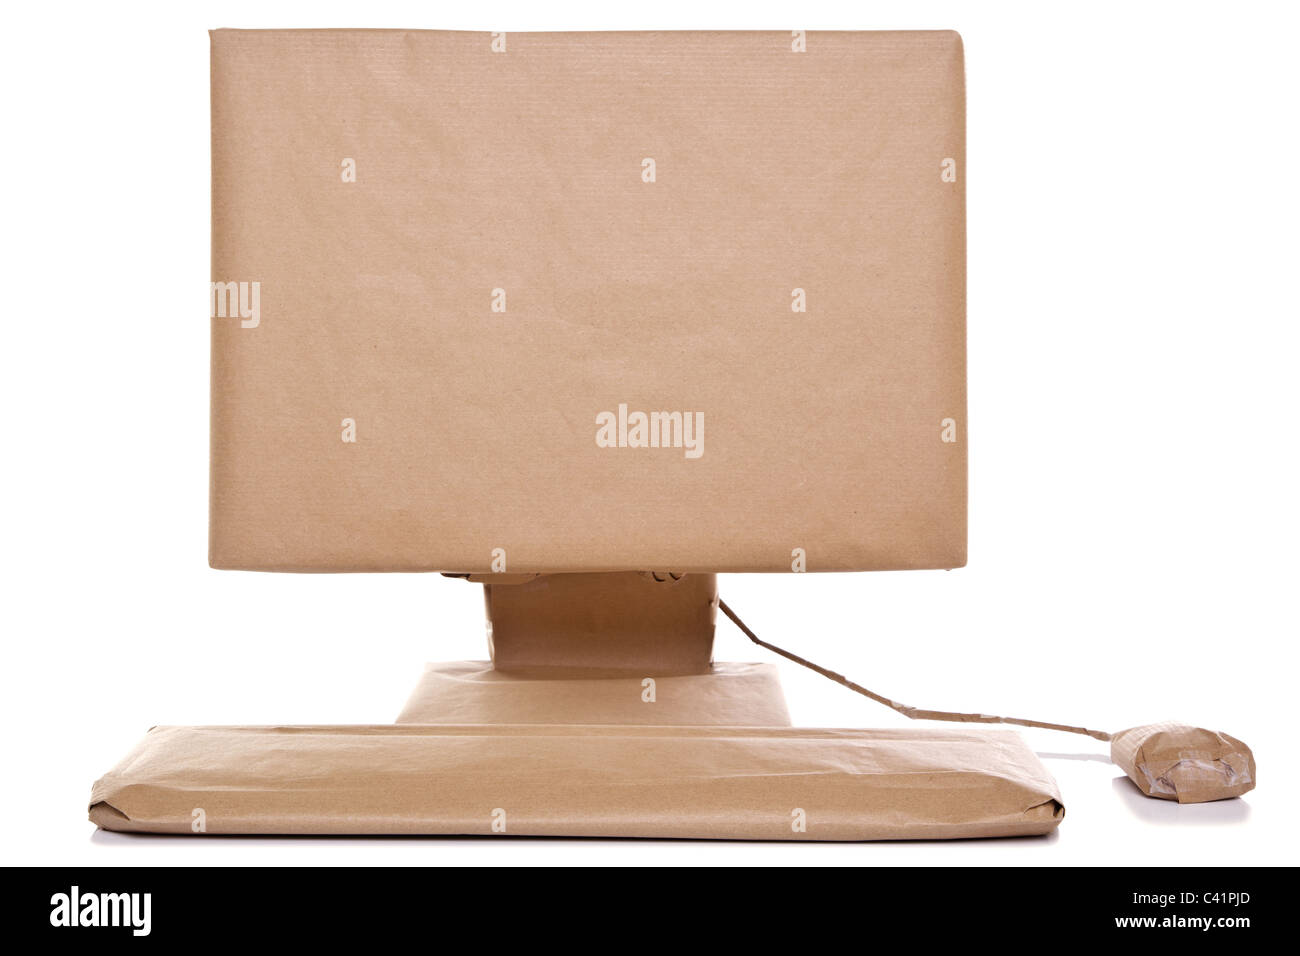 Photo of a computer wrapped in recycled brown paper, isolated on a white background. Stock Photo